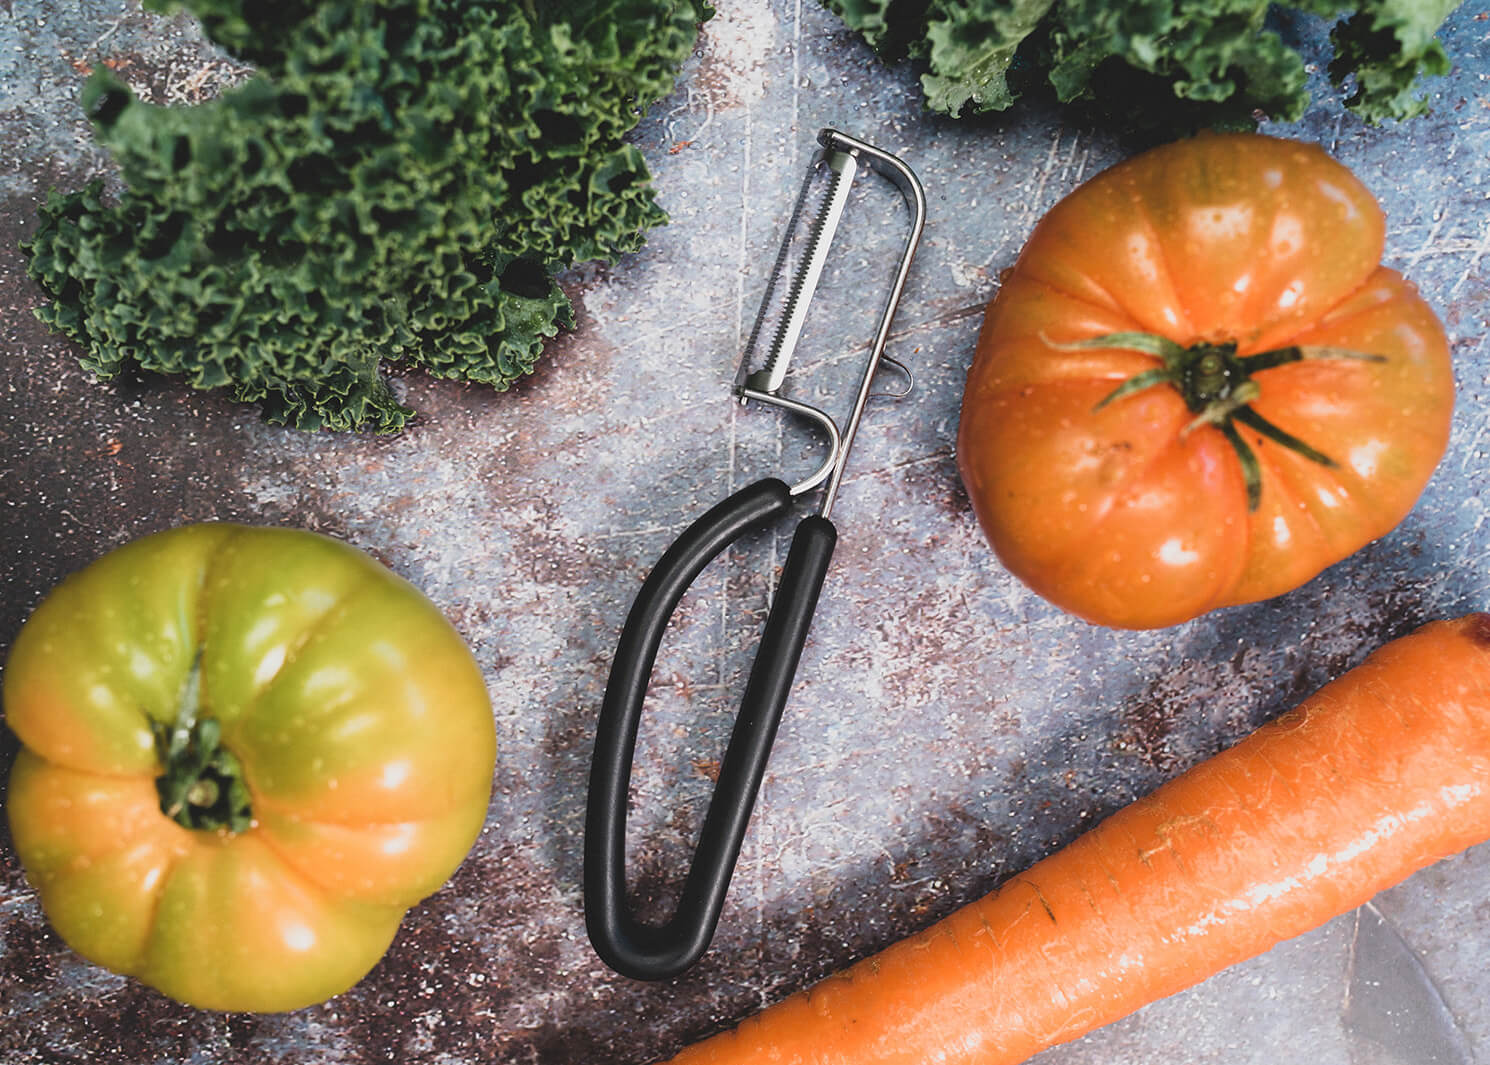 Spartan peeler with Japanese-steel blade and black ergonomic handle lays on cutting board with field tomatoes and a large carrot